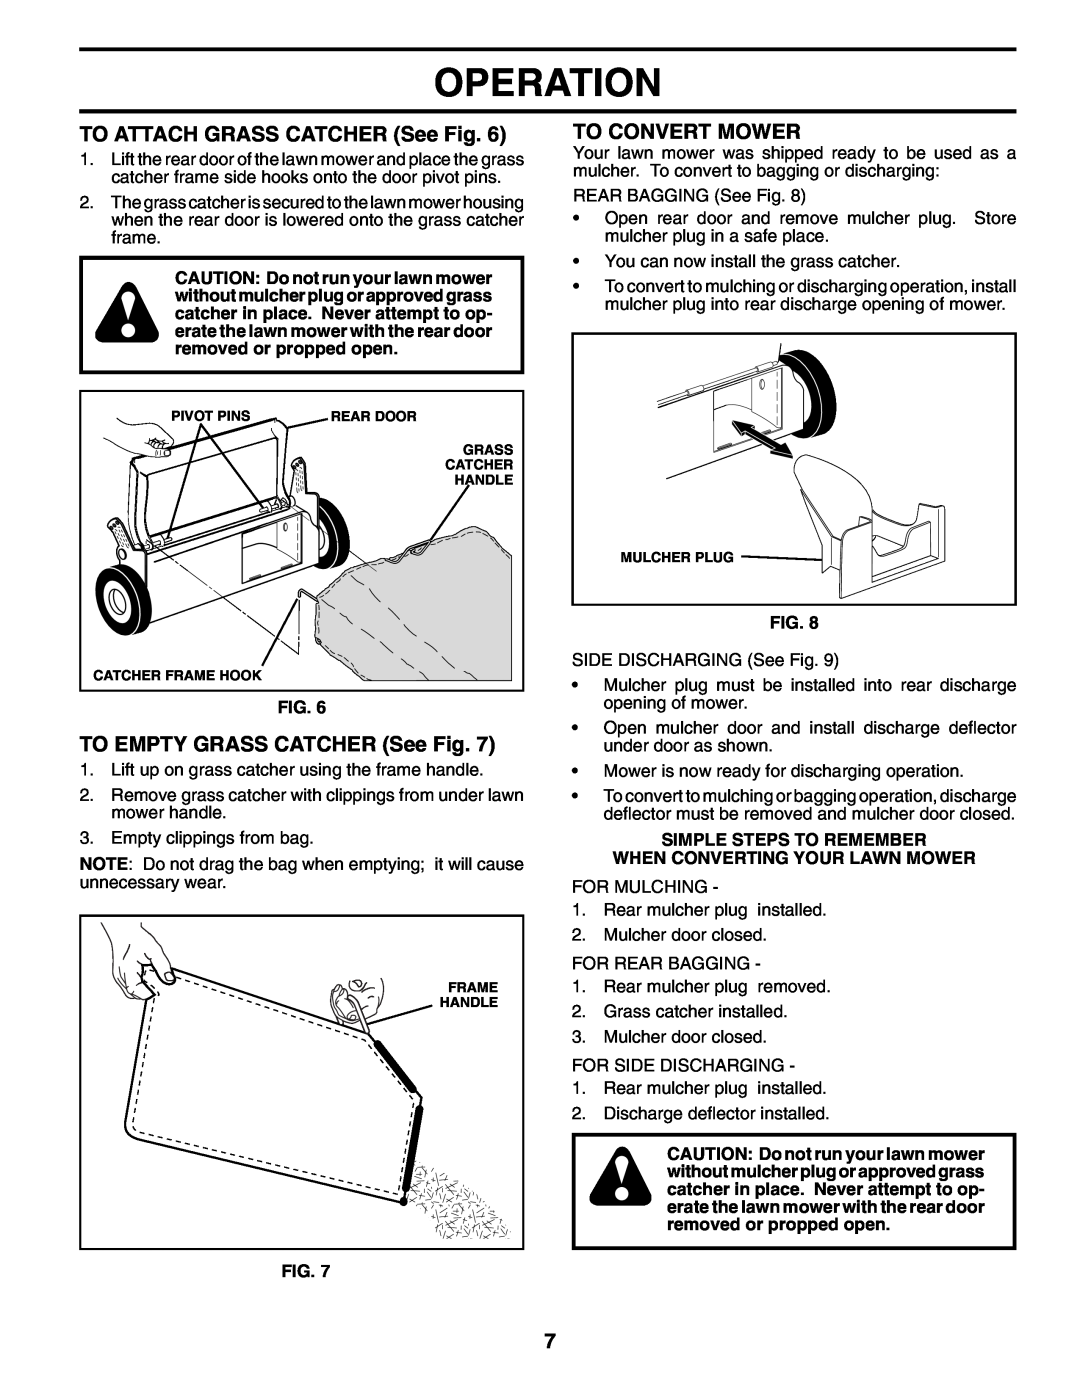 Husqvarna 7021RS owner manual TO ATTACH GRASS CATCHER See Fig, TO EMPTY GRASS CATCHER See Fig, To Convert Mower, Operation 